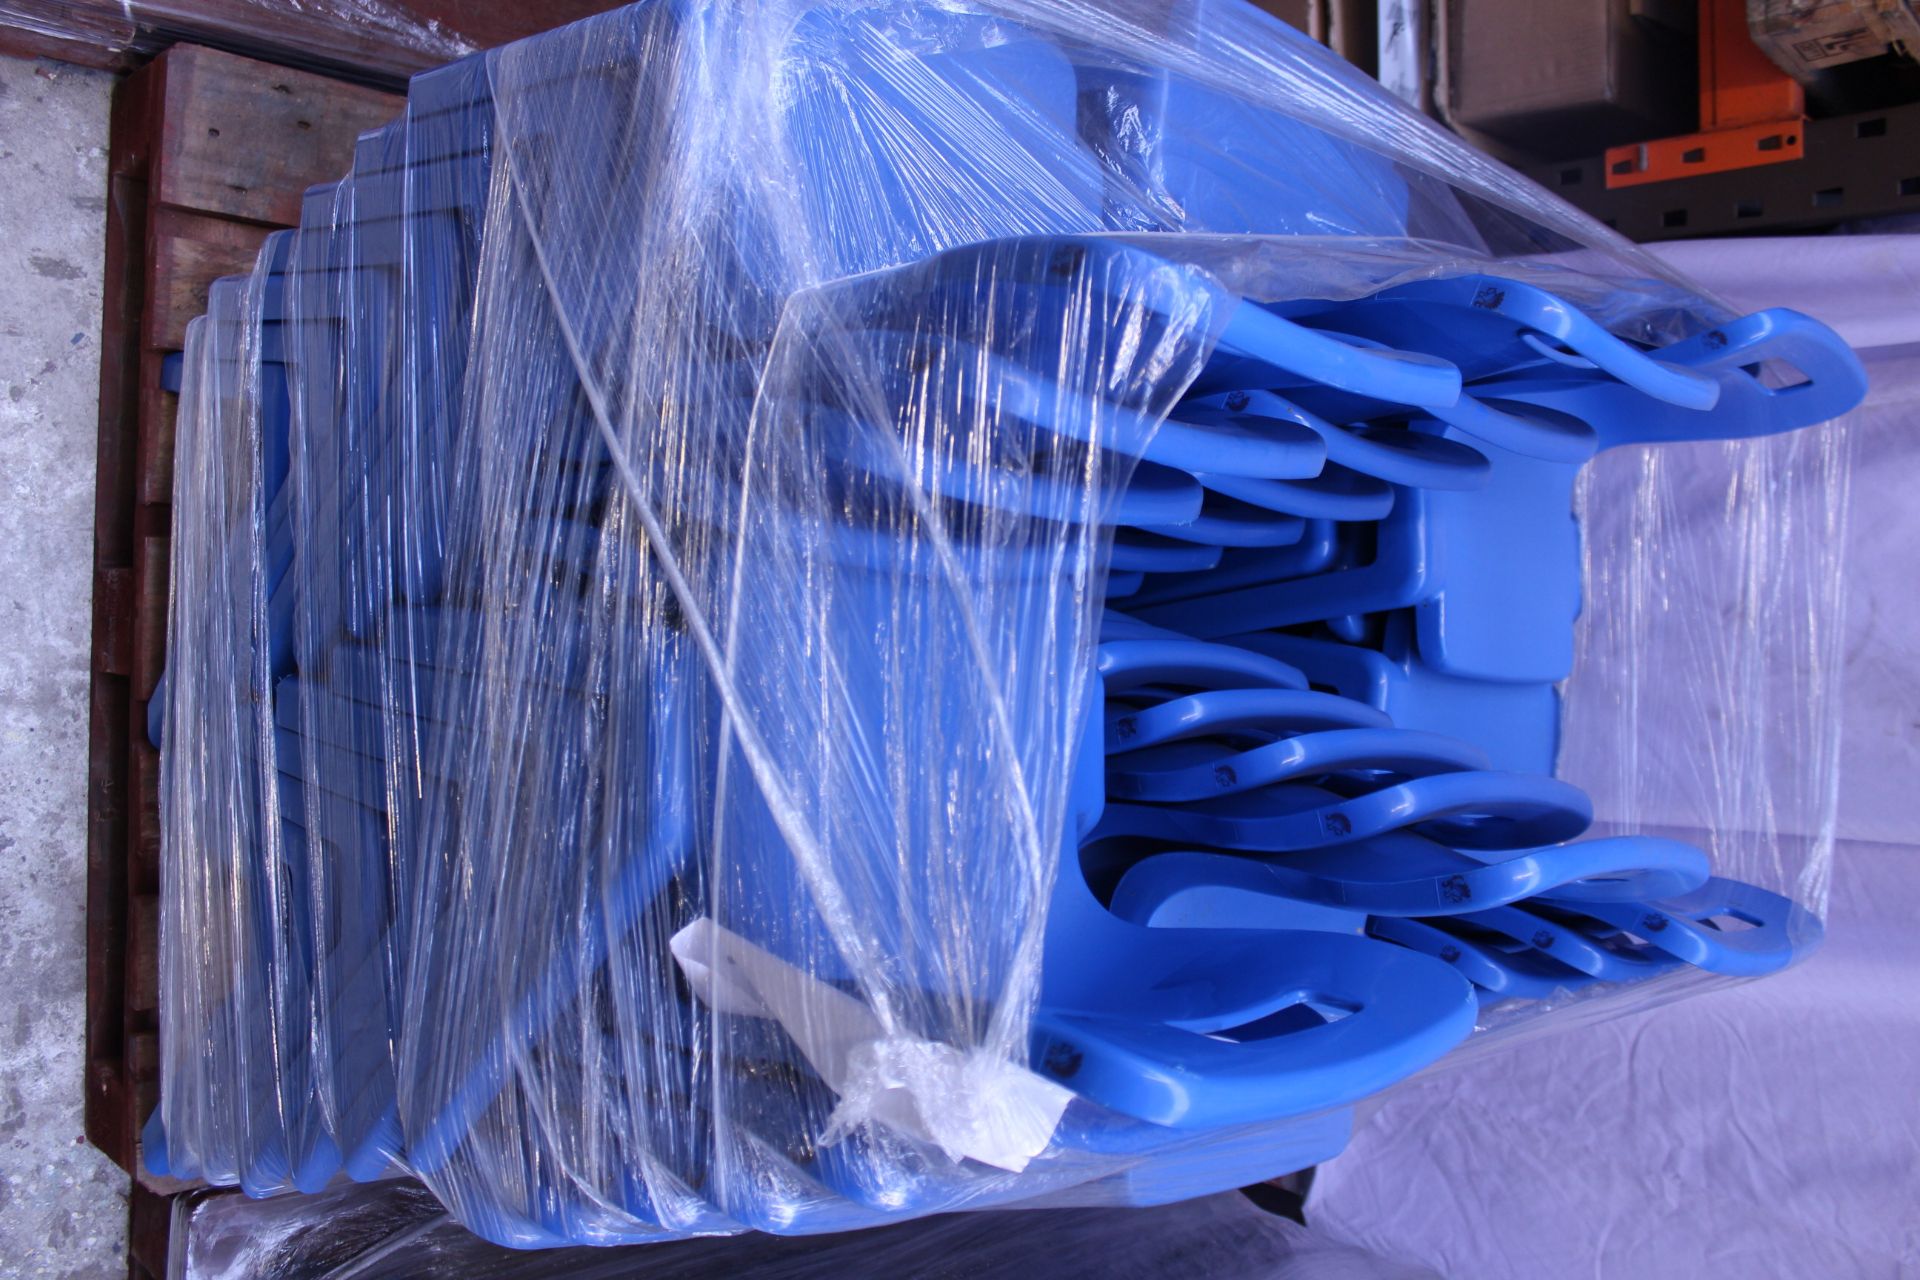 V Grade U A Pallet Of Forty Two Blue Plastic Primary School Chairs - Image 2 of 2